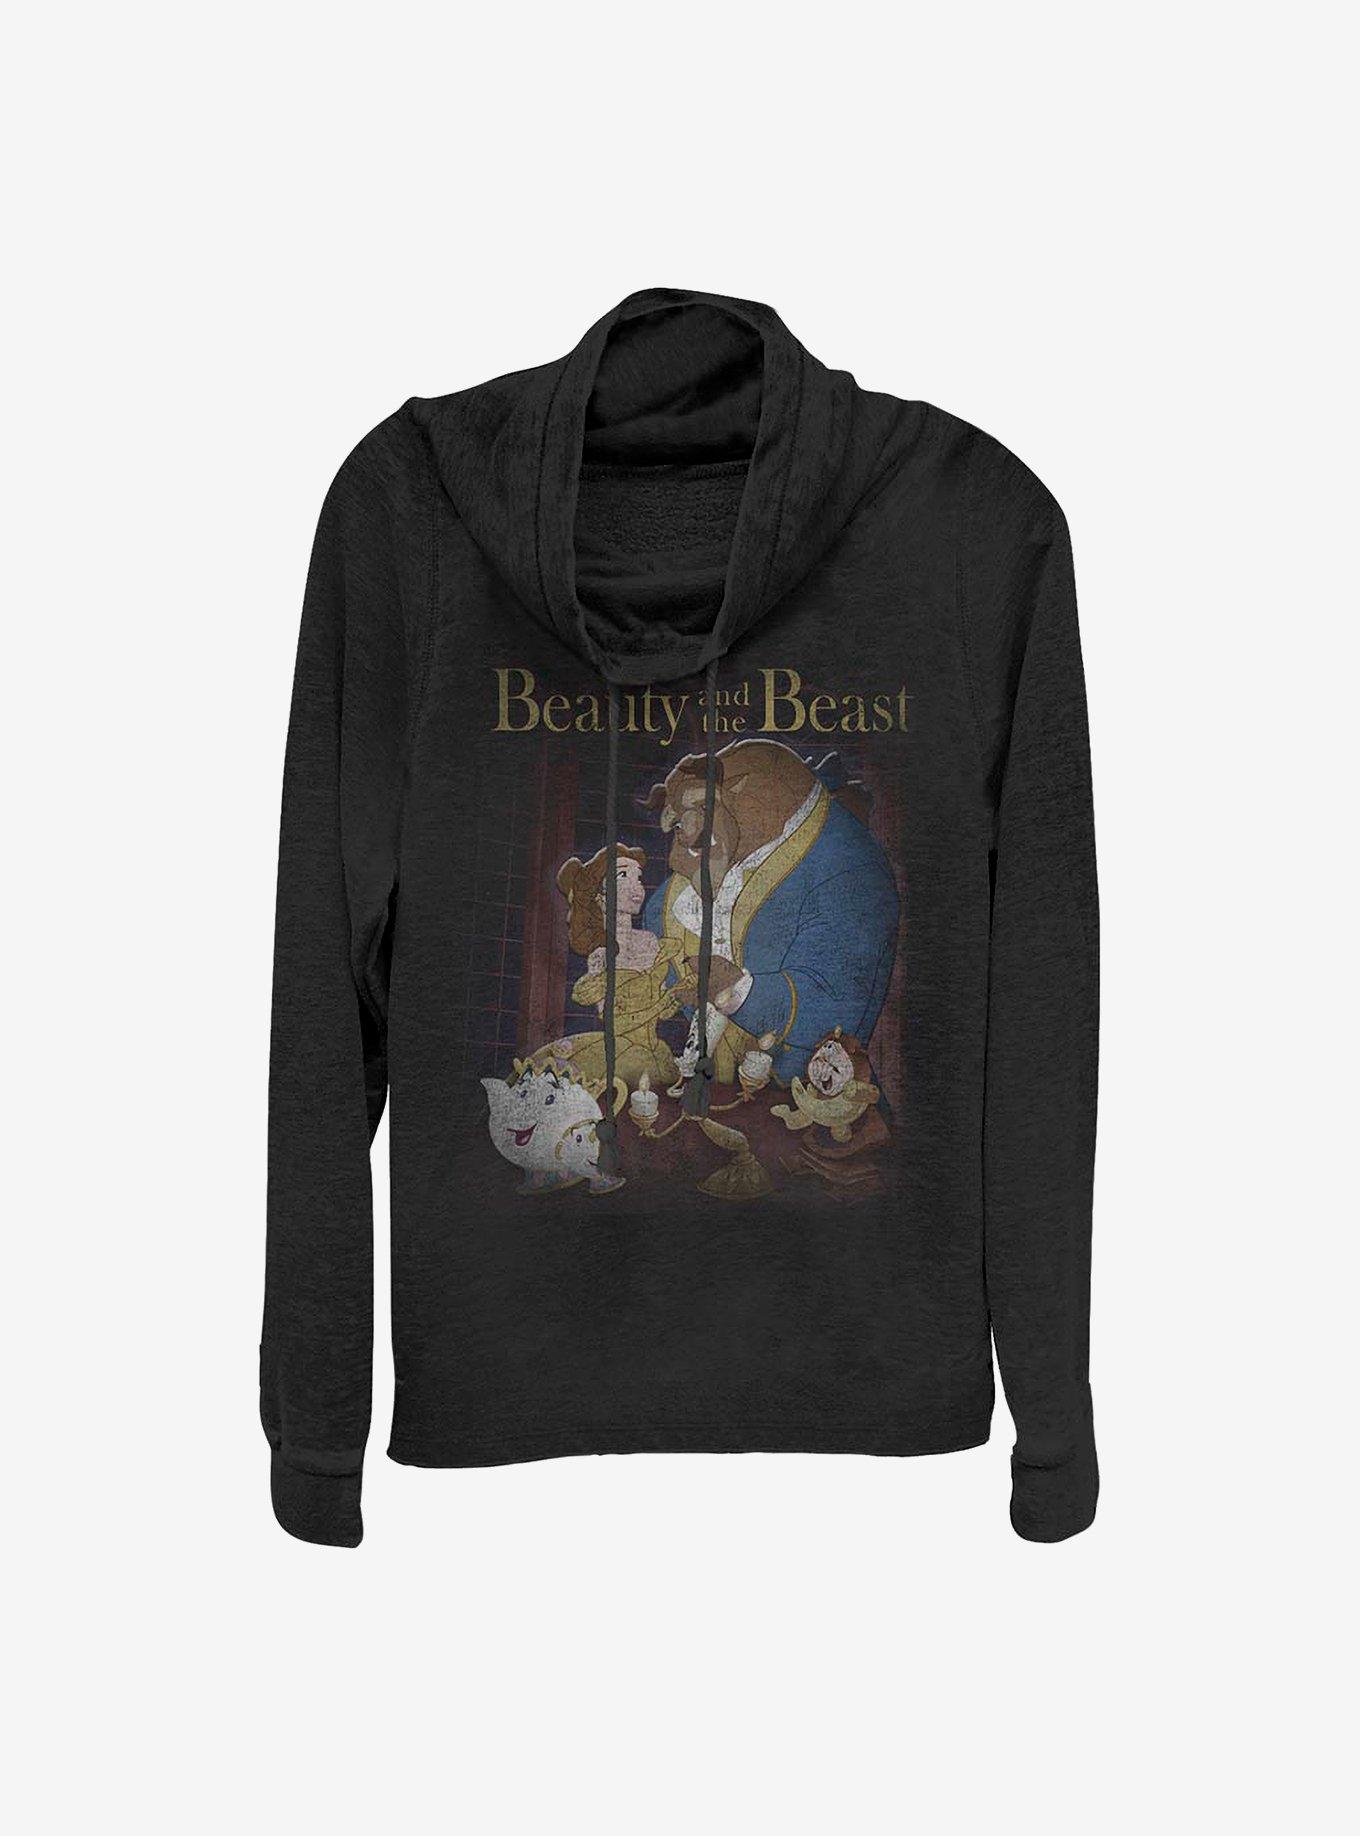 Disney Beauty And The Beast Poster Cowlneck Long-Sleeve Girls Top, BLACK, hi-res